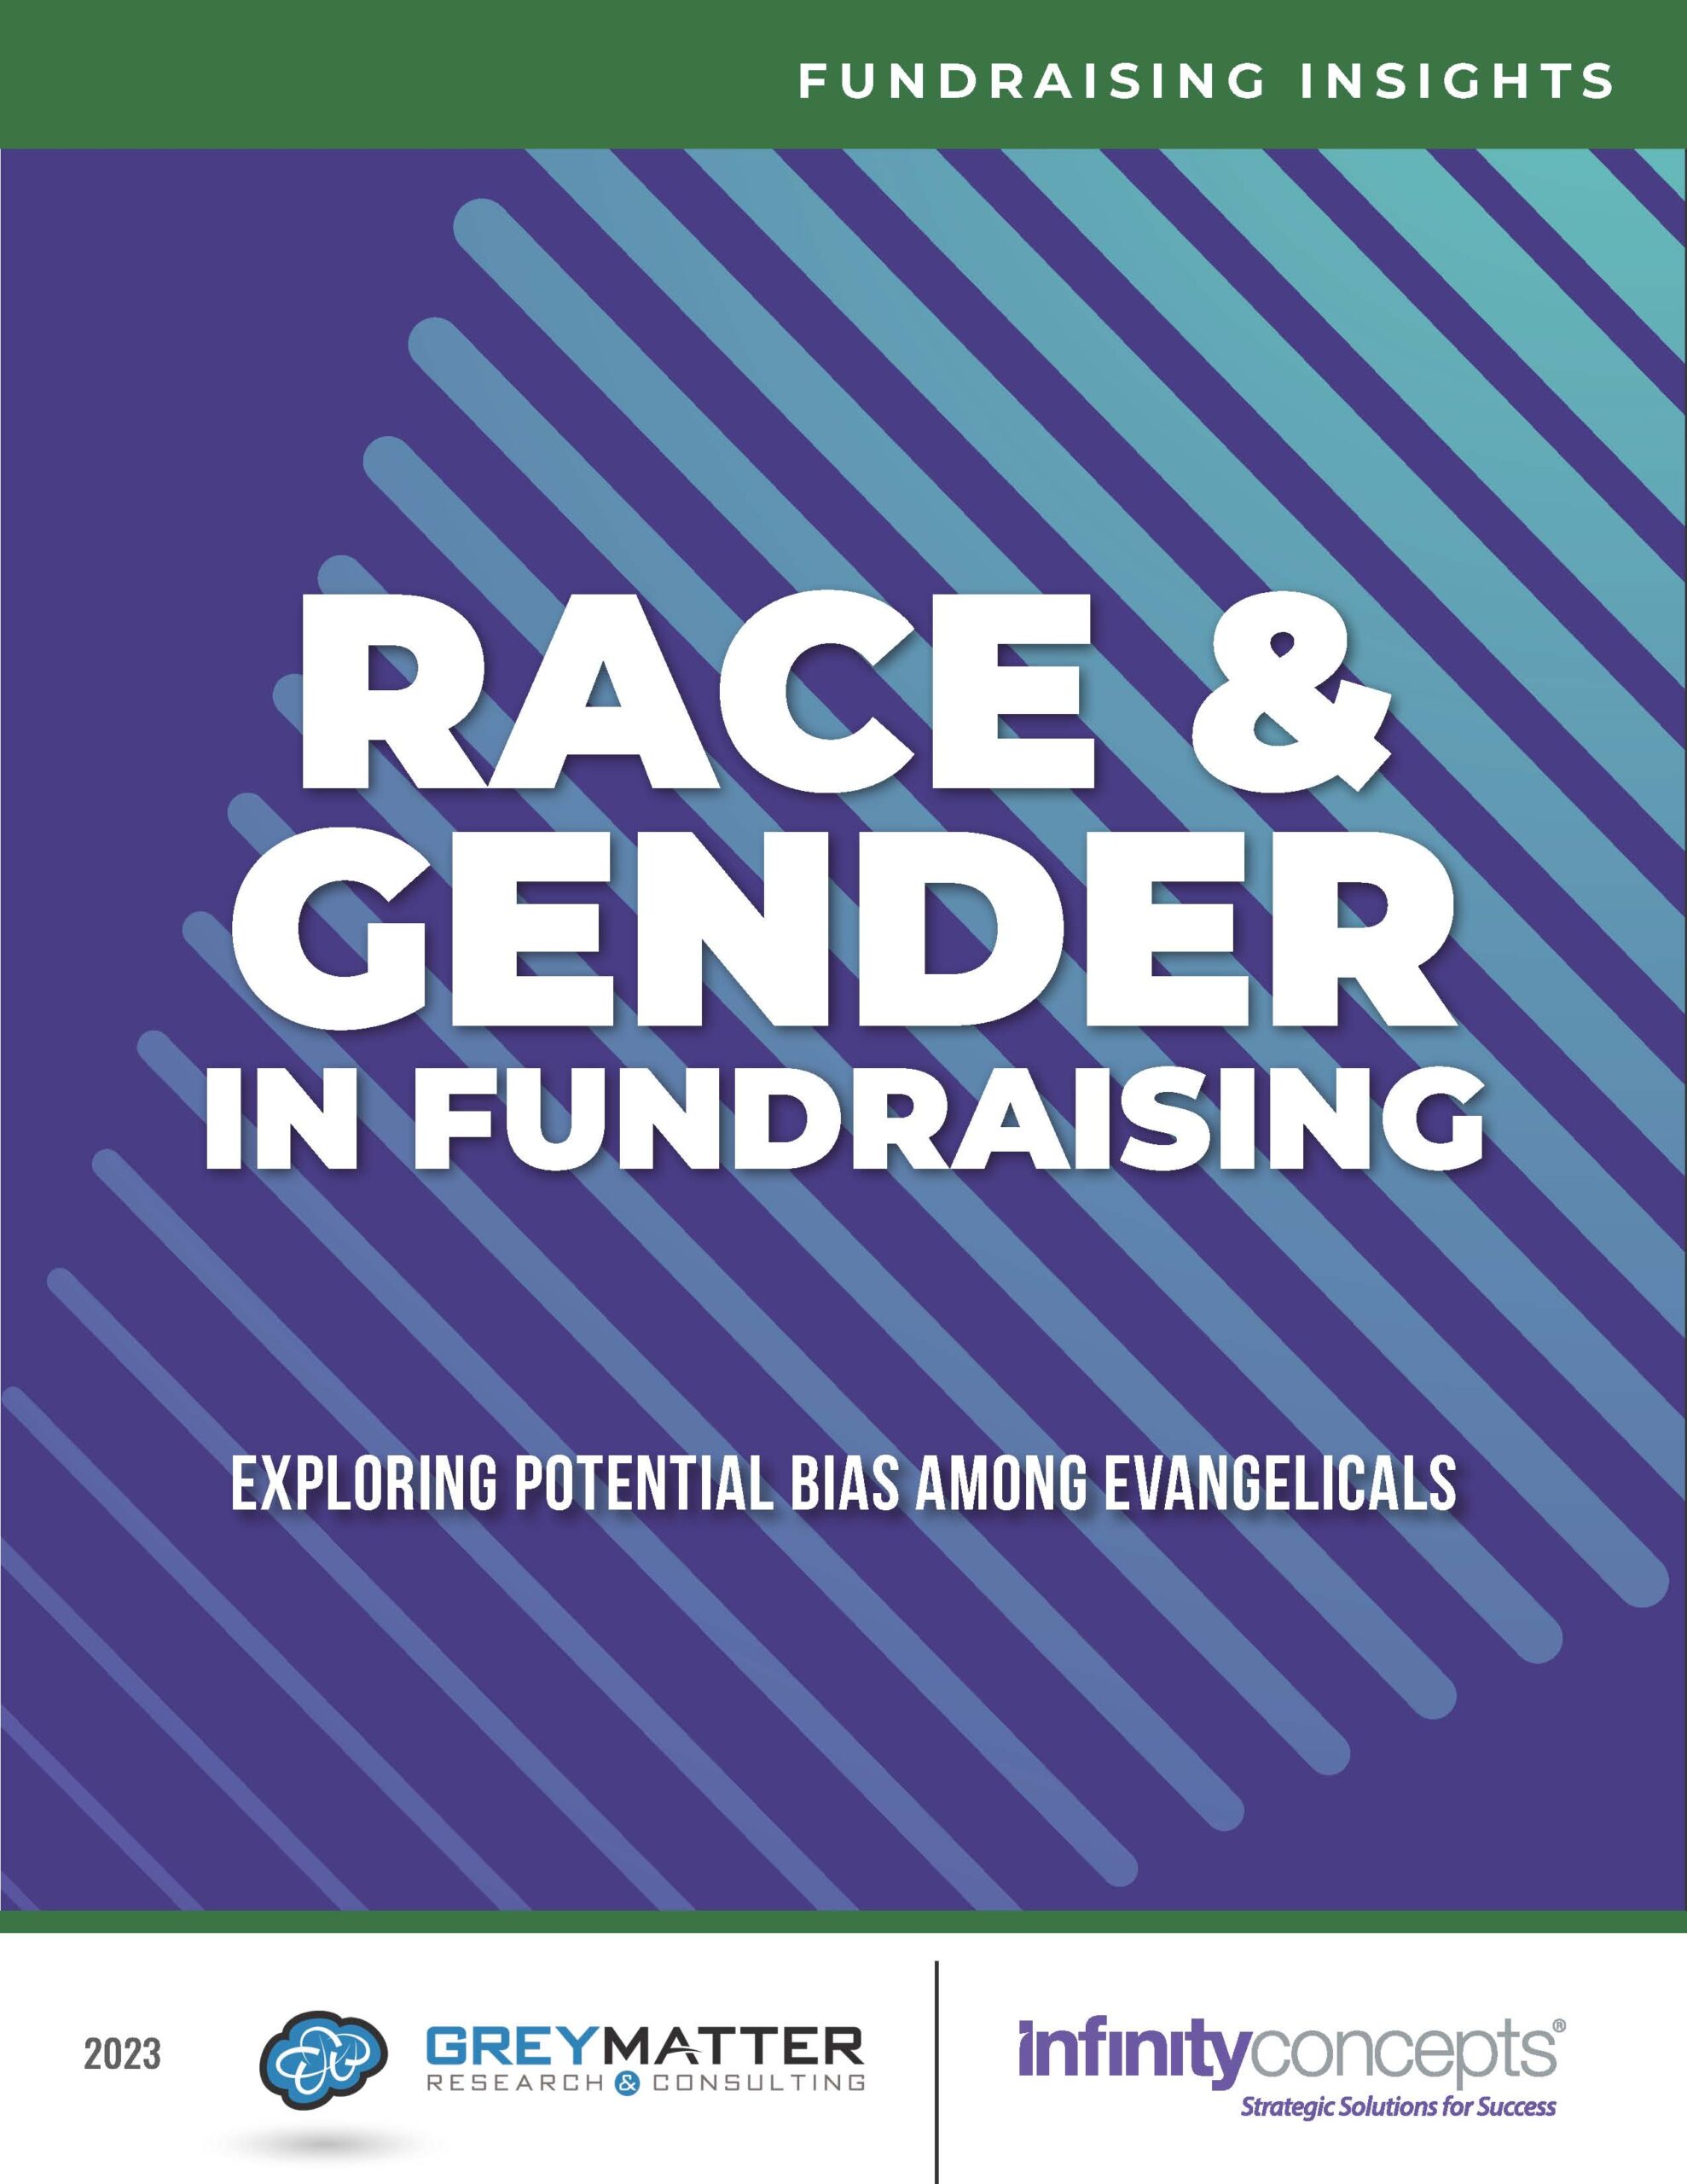 Race and Gender in Fundraising